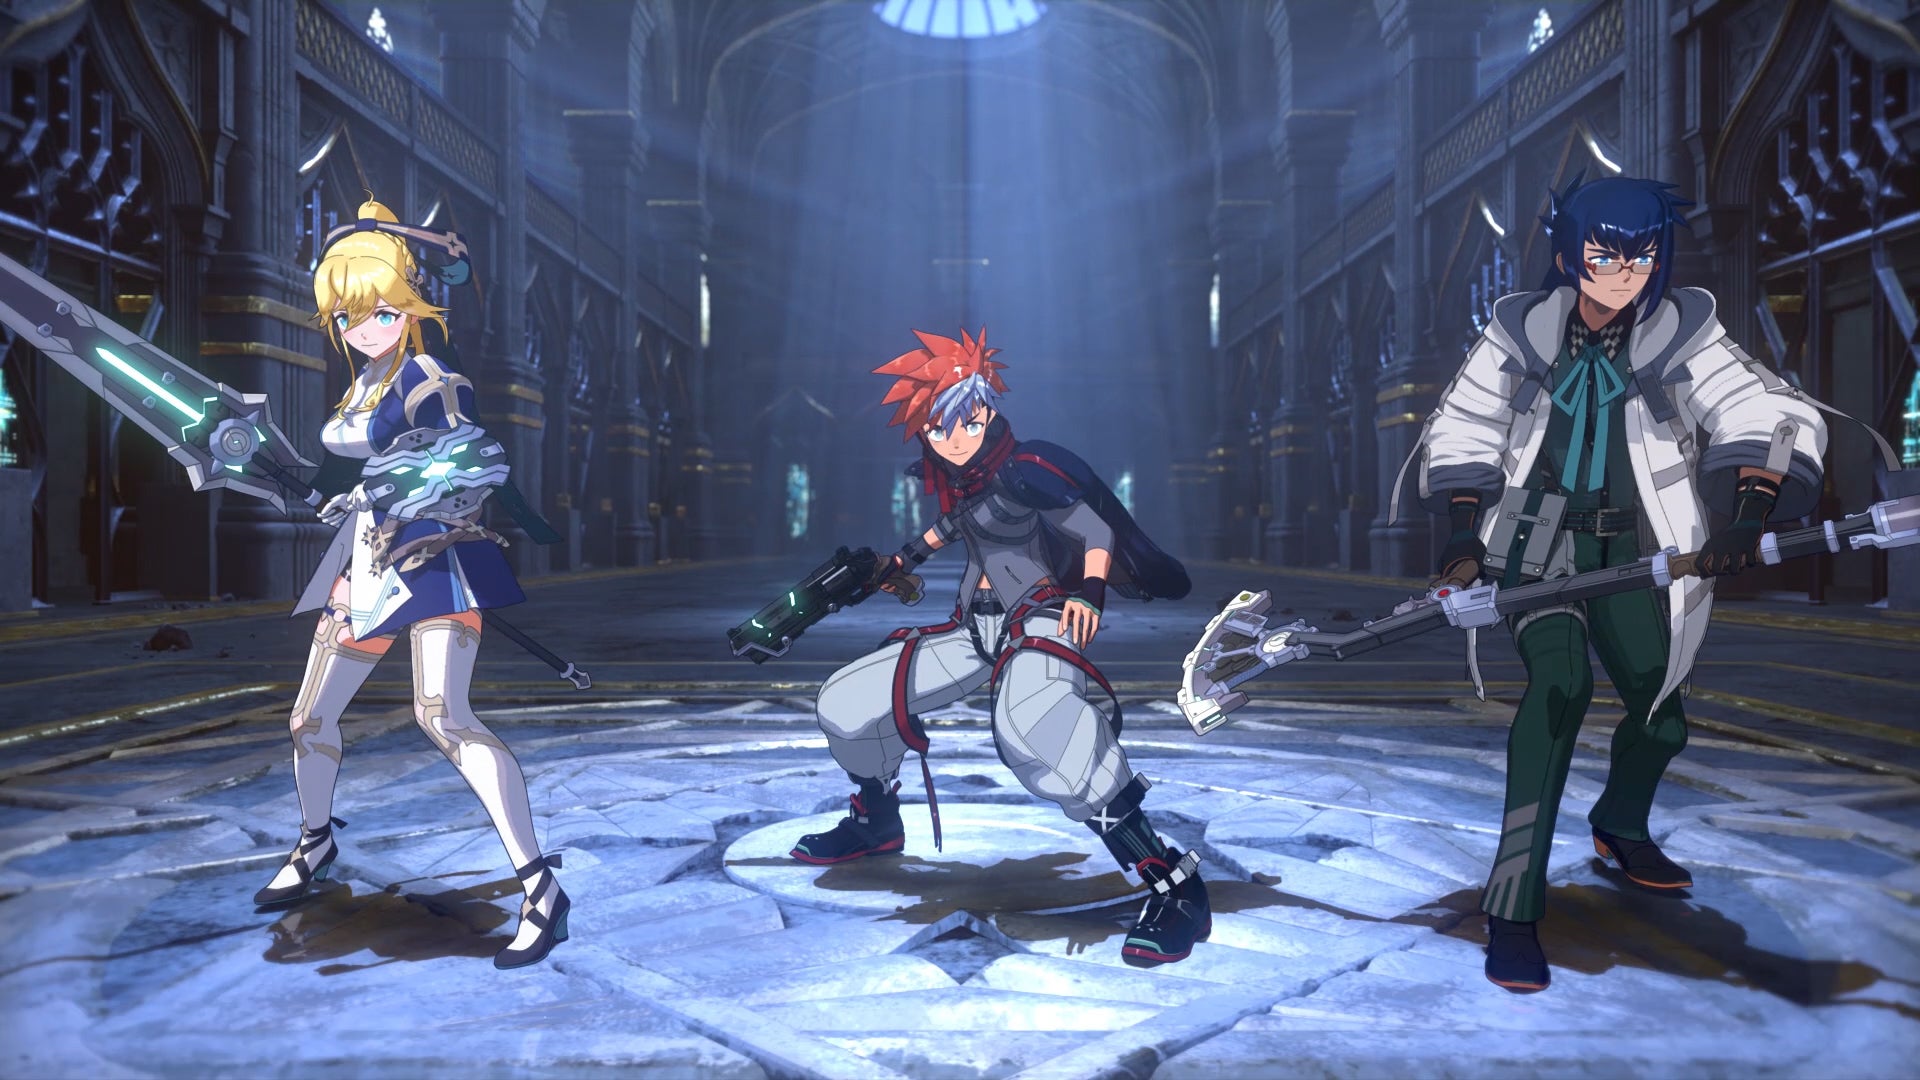 Three anime characters prepare for battle in Armed Fantasia